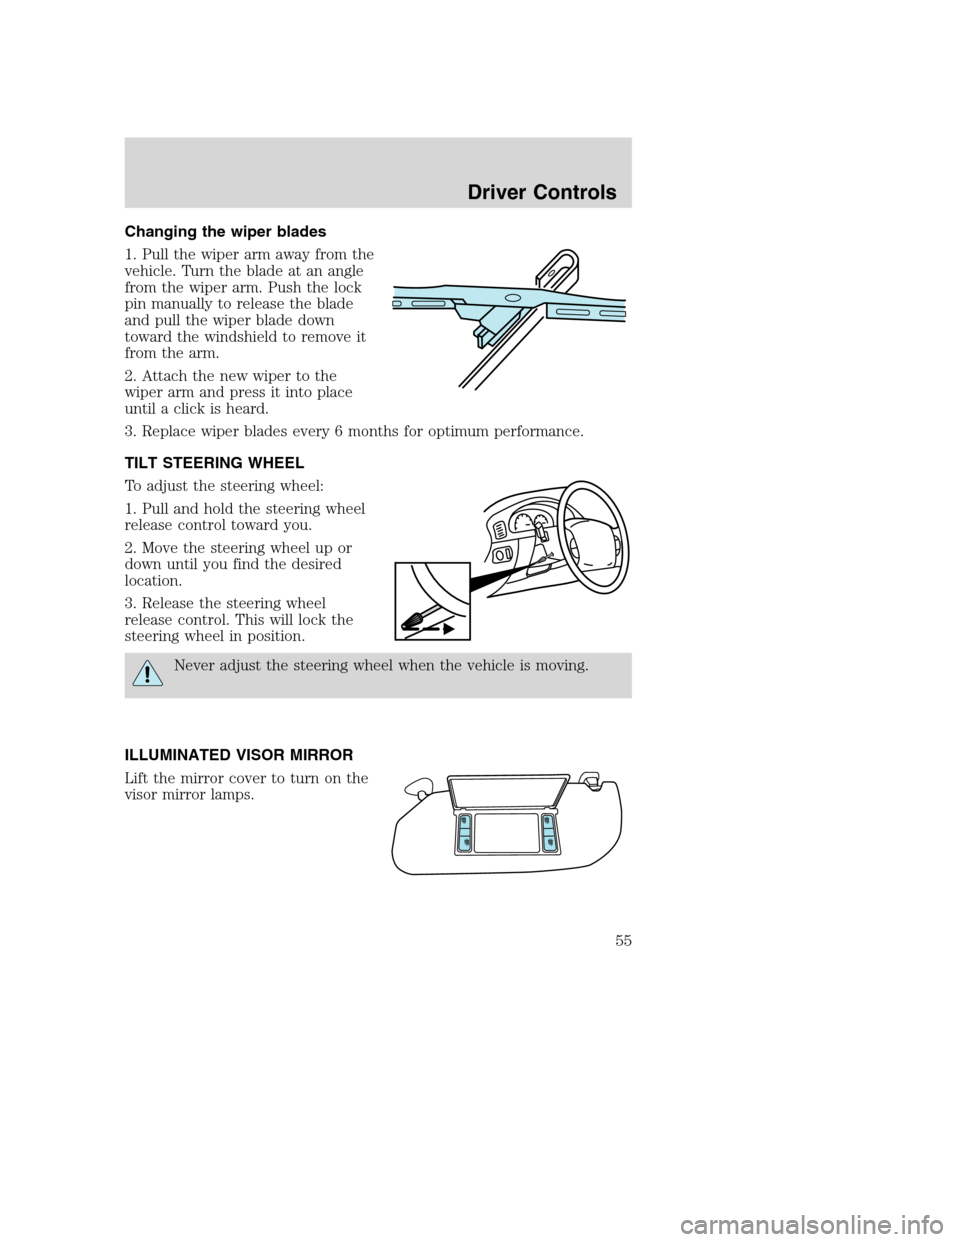 FORD EXCURSION 2003 1.G Workshop Manual Changing the wiper blades
1. Pull the wiper arm away from the
vehicle. Turn the blade at an angle
from the wiper arm. Push the lock
pin manually to release the blade
and pull the wiper blade down
towa